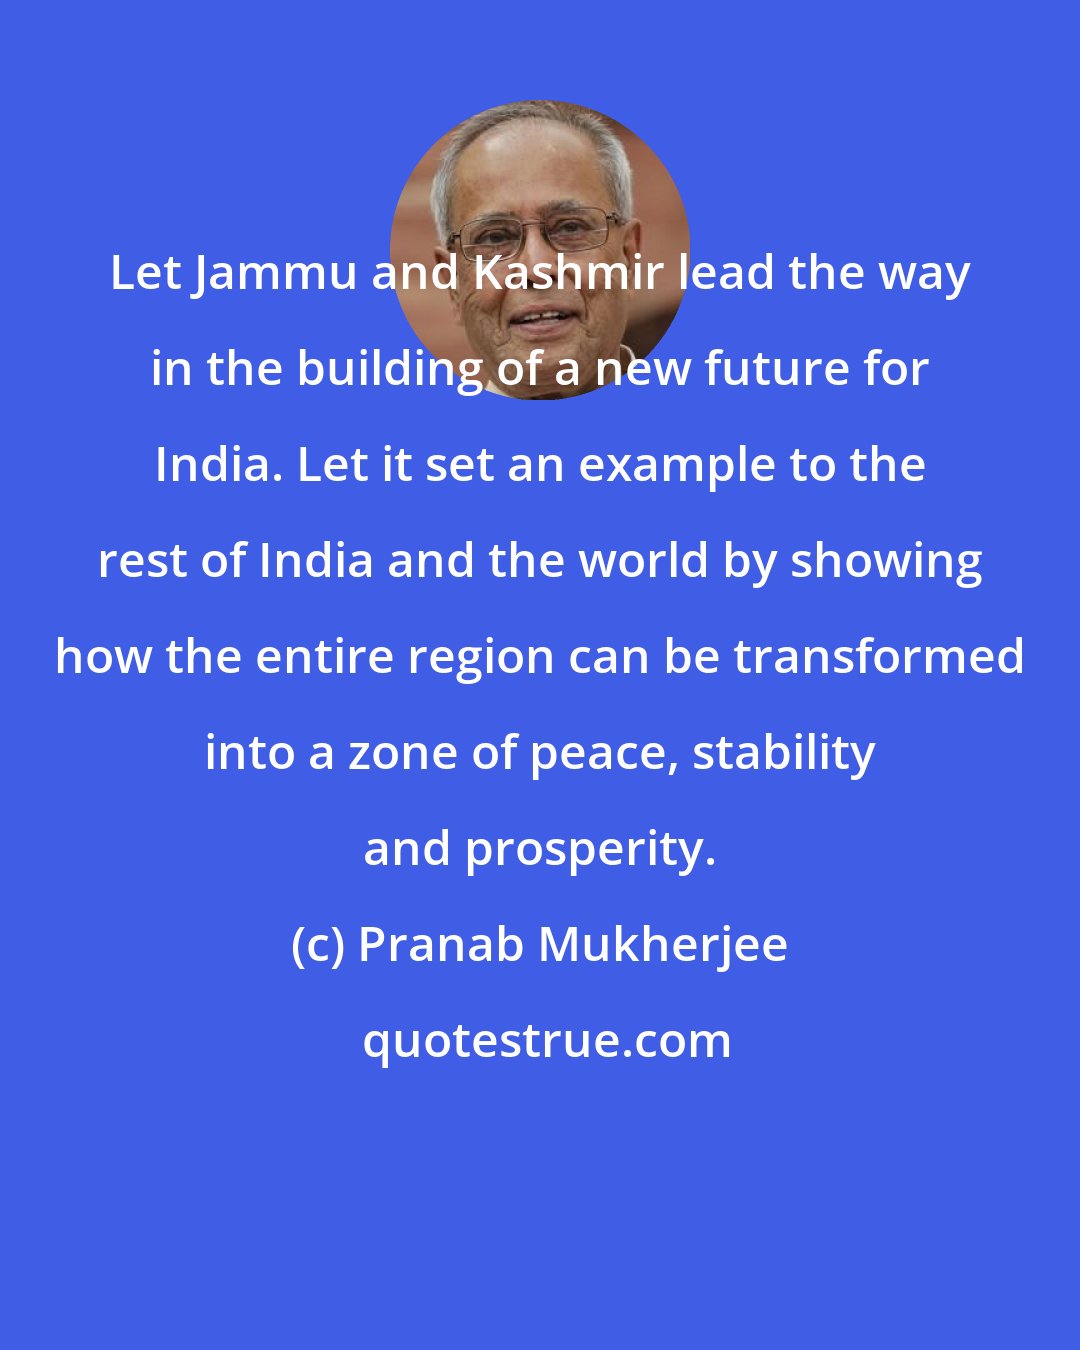 Pranab Mukherjee: Let Jammu and Kashmir lead the way in the building of a new future for India. Let it set an example to the rest of India and the world by showing how the entire region can be transformed into a zone of peace, stability and prosperity.